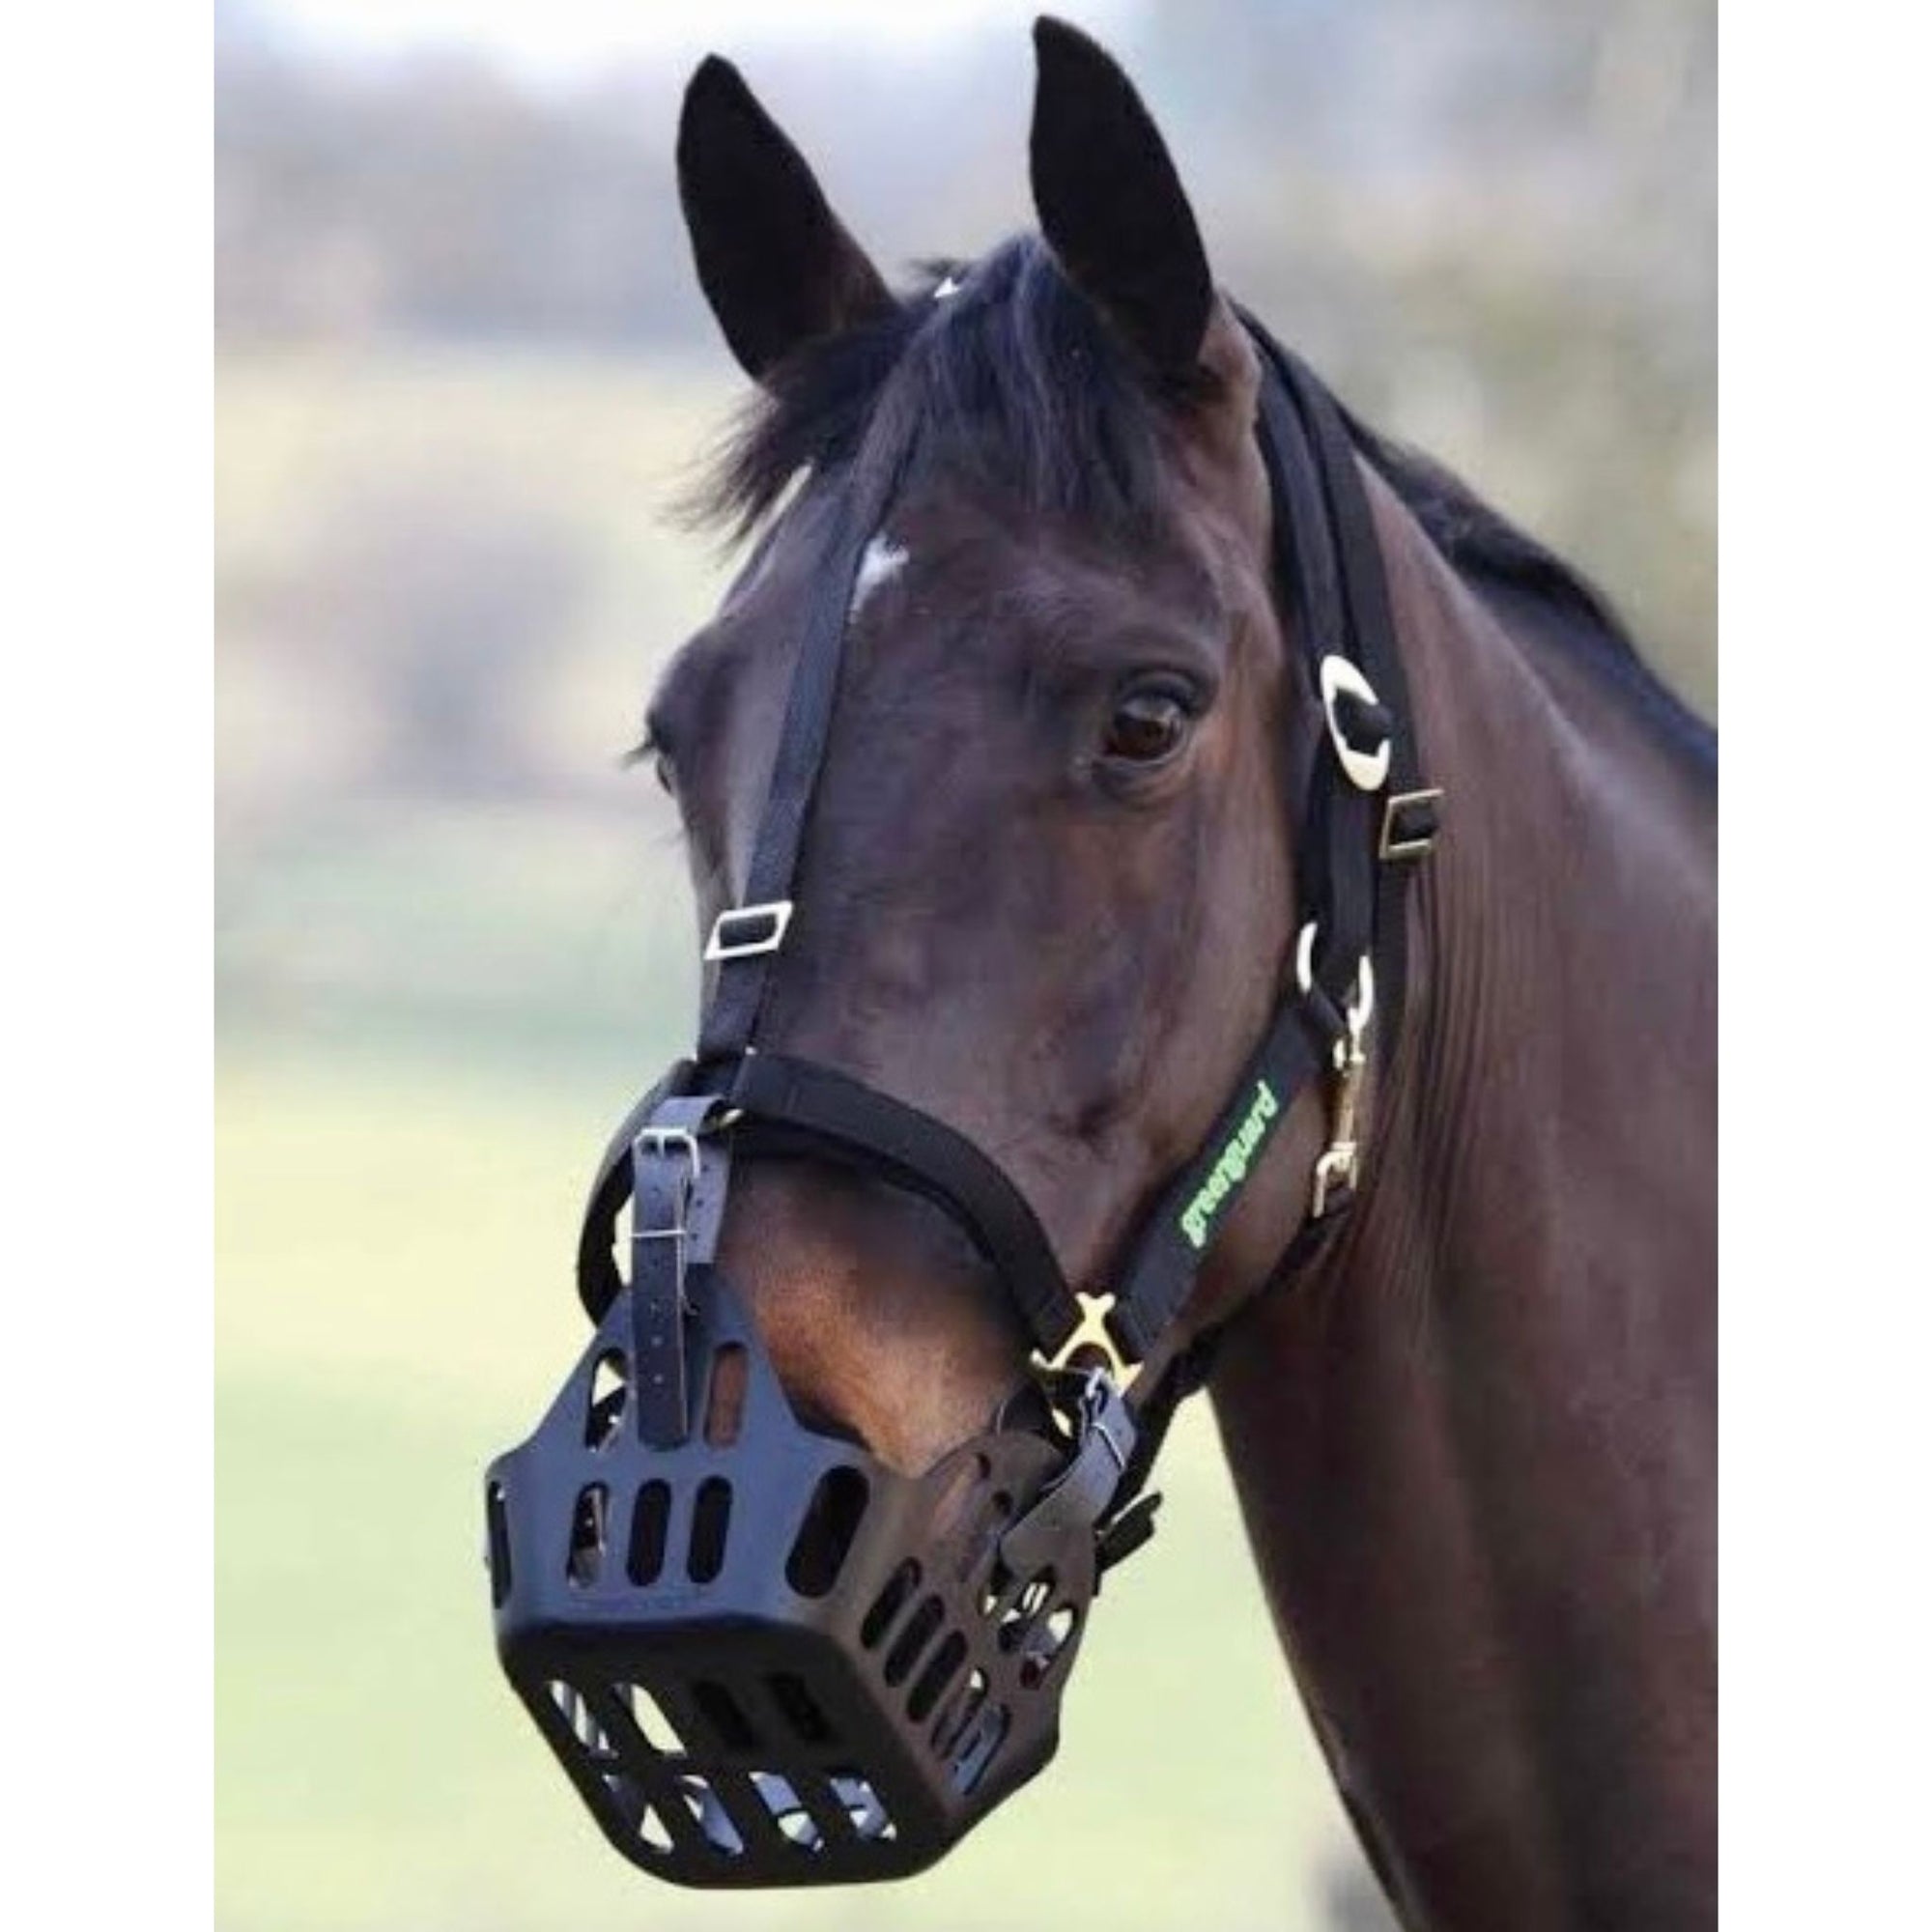 Dark bay horse wearing halter with black grazing muzzle attached.